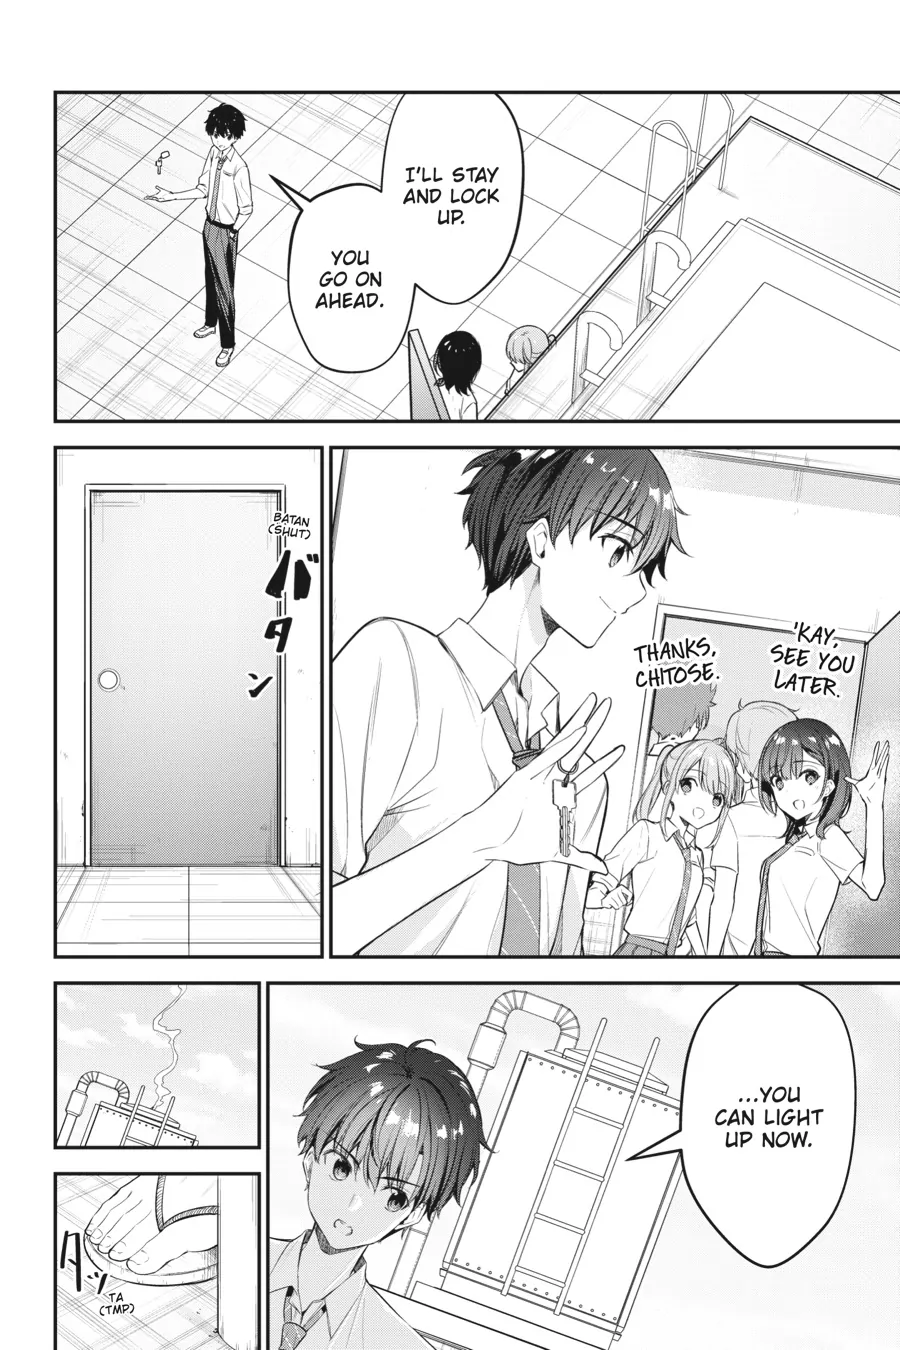 Chitose-Kun Is Inside A Ramune Bottle - Page 2